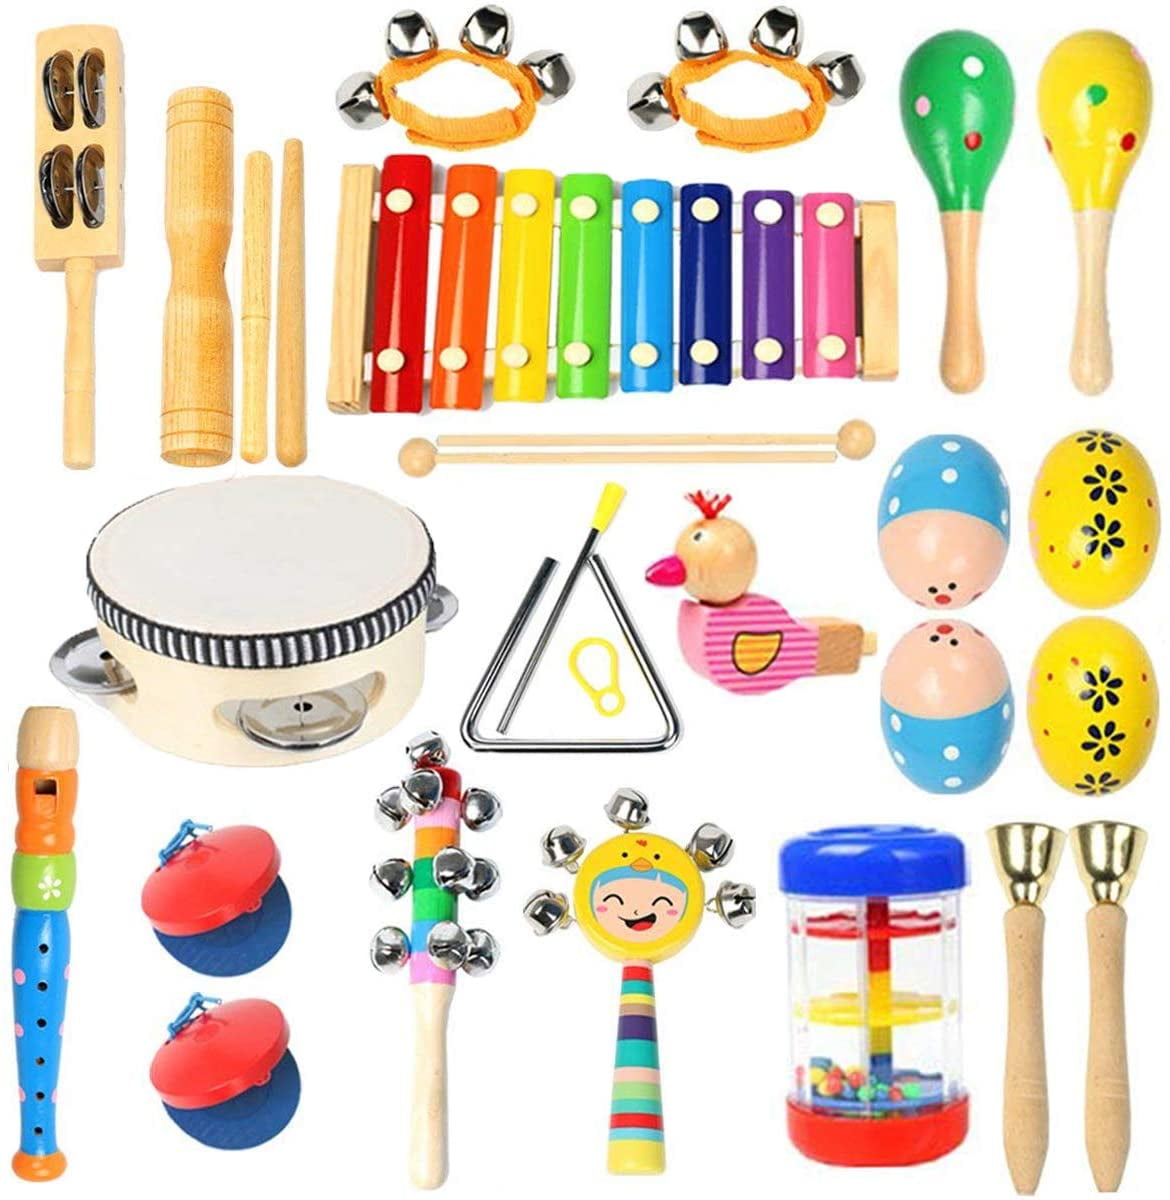 Wooden Percussion Instruments Toy Activity Center for Preschool Educational with Storage Backpack Amagoing Kids Musical Instruments 